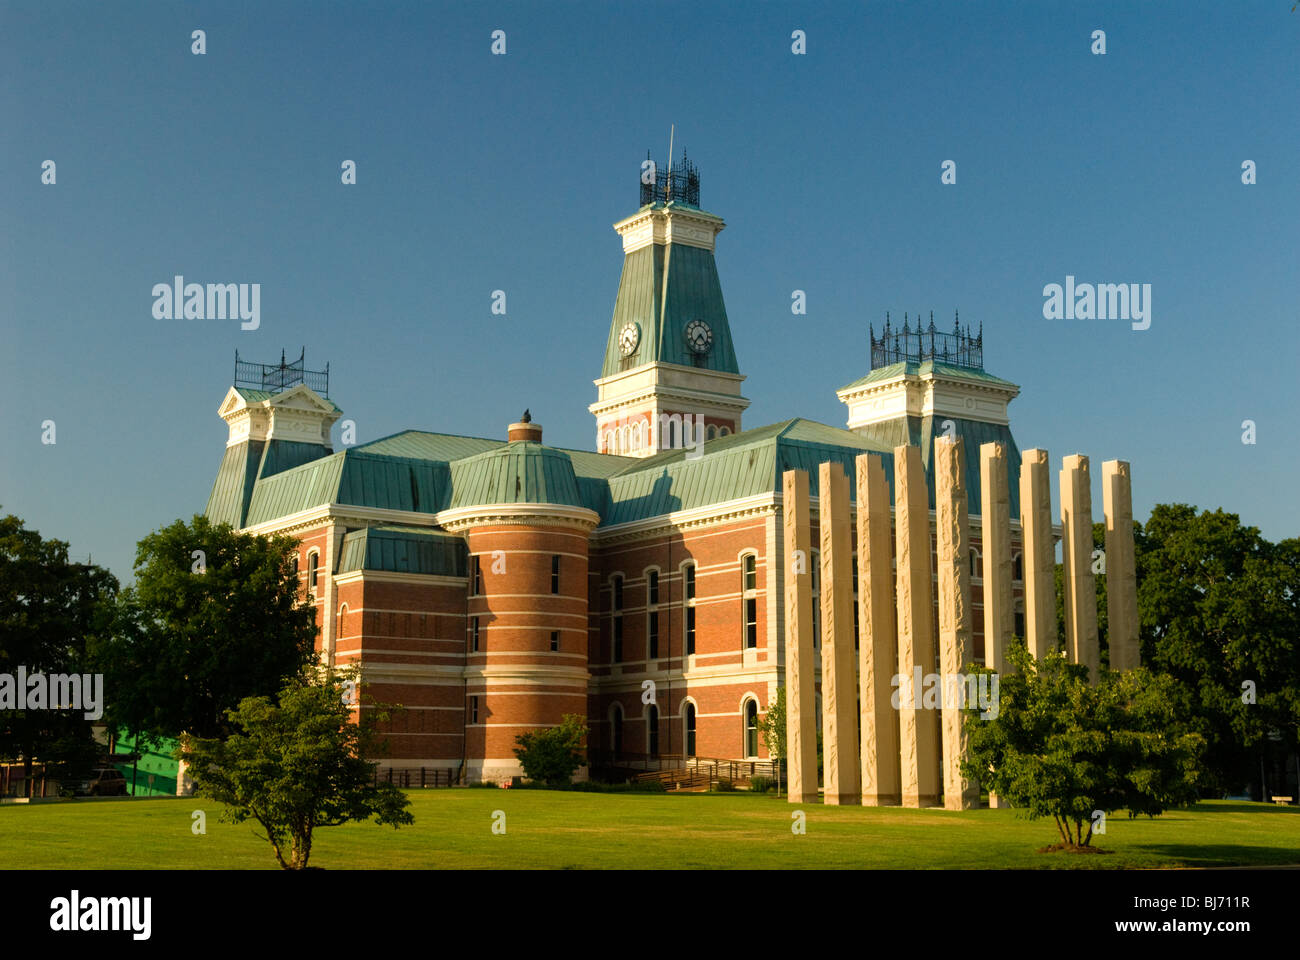 Columbus, Indiana architecture. Bartholomew County Courthouse built in 1874. National Registry of Historic Places. Stock Photo